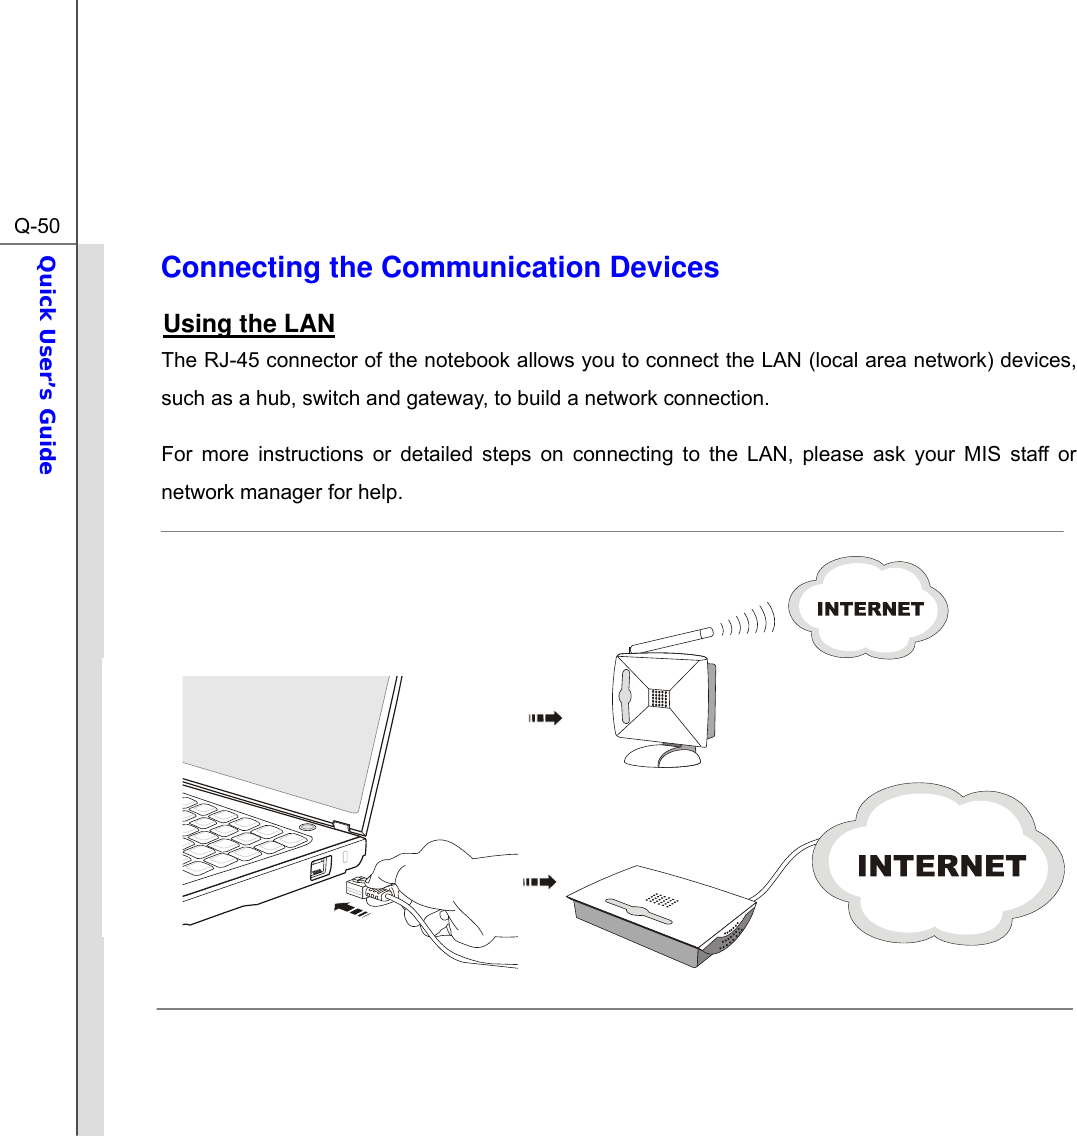  Q-50Quick User’s Guide  Connecting the Communication Devices Using the LAN The RJ-45 connector of the notebook allows you to connect the LAN (local area network) devices, such as a hub, switch and gateway, to build a network connection. For more instructions or detailed steps on connecting to the LAN, please ask your MIS staff or network manager for help.                